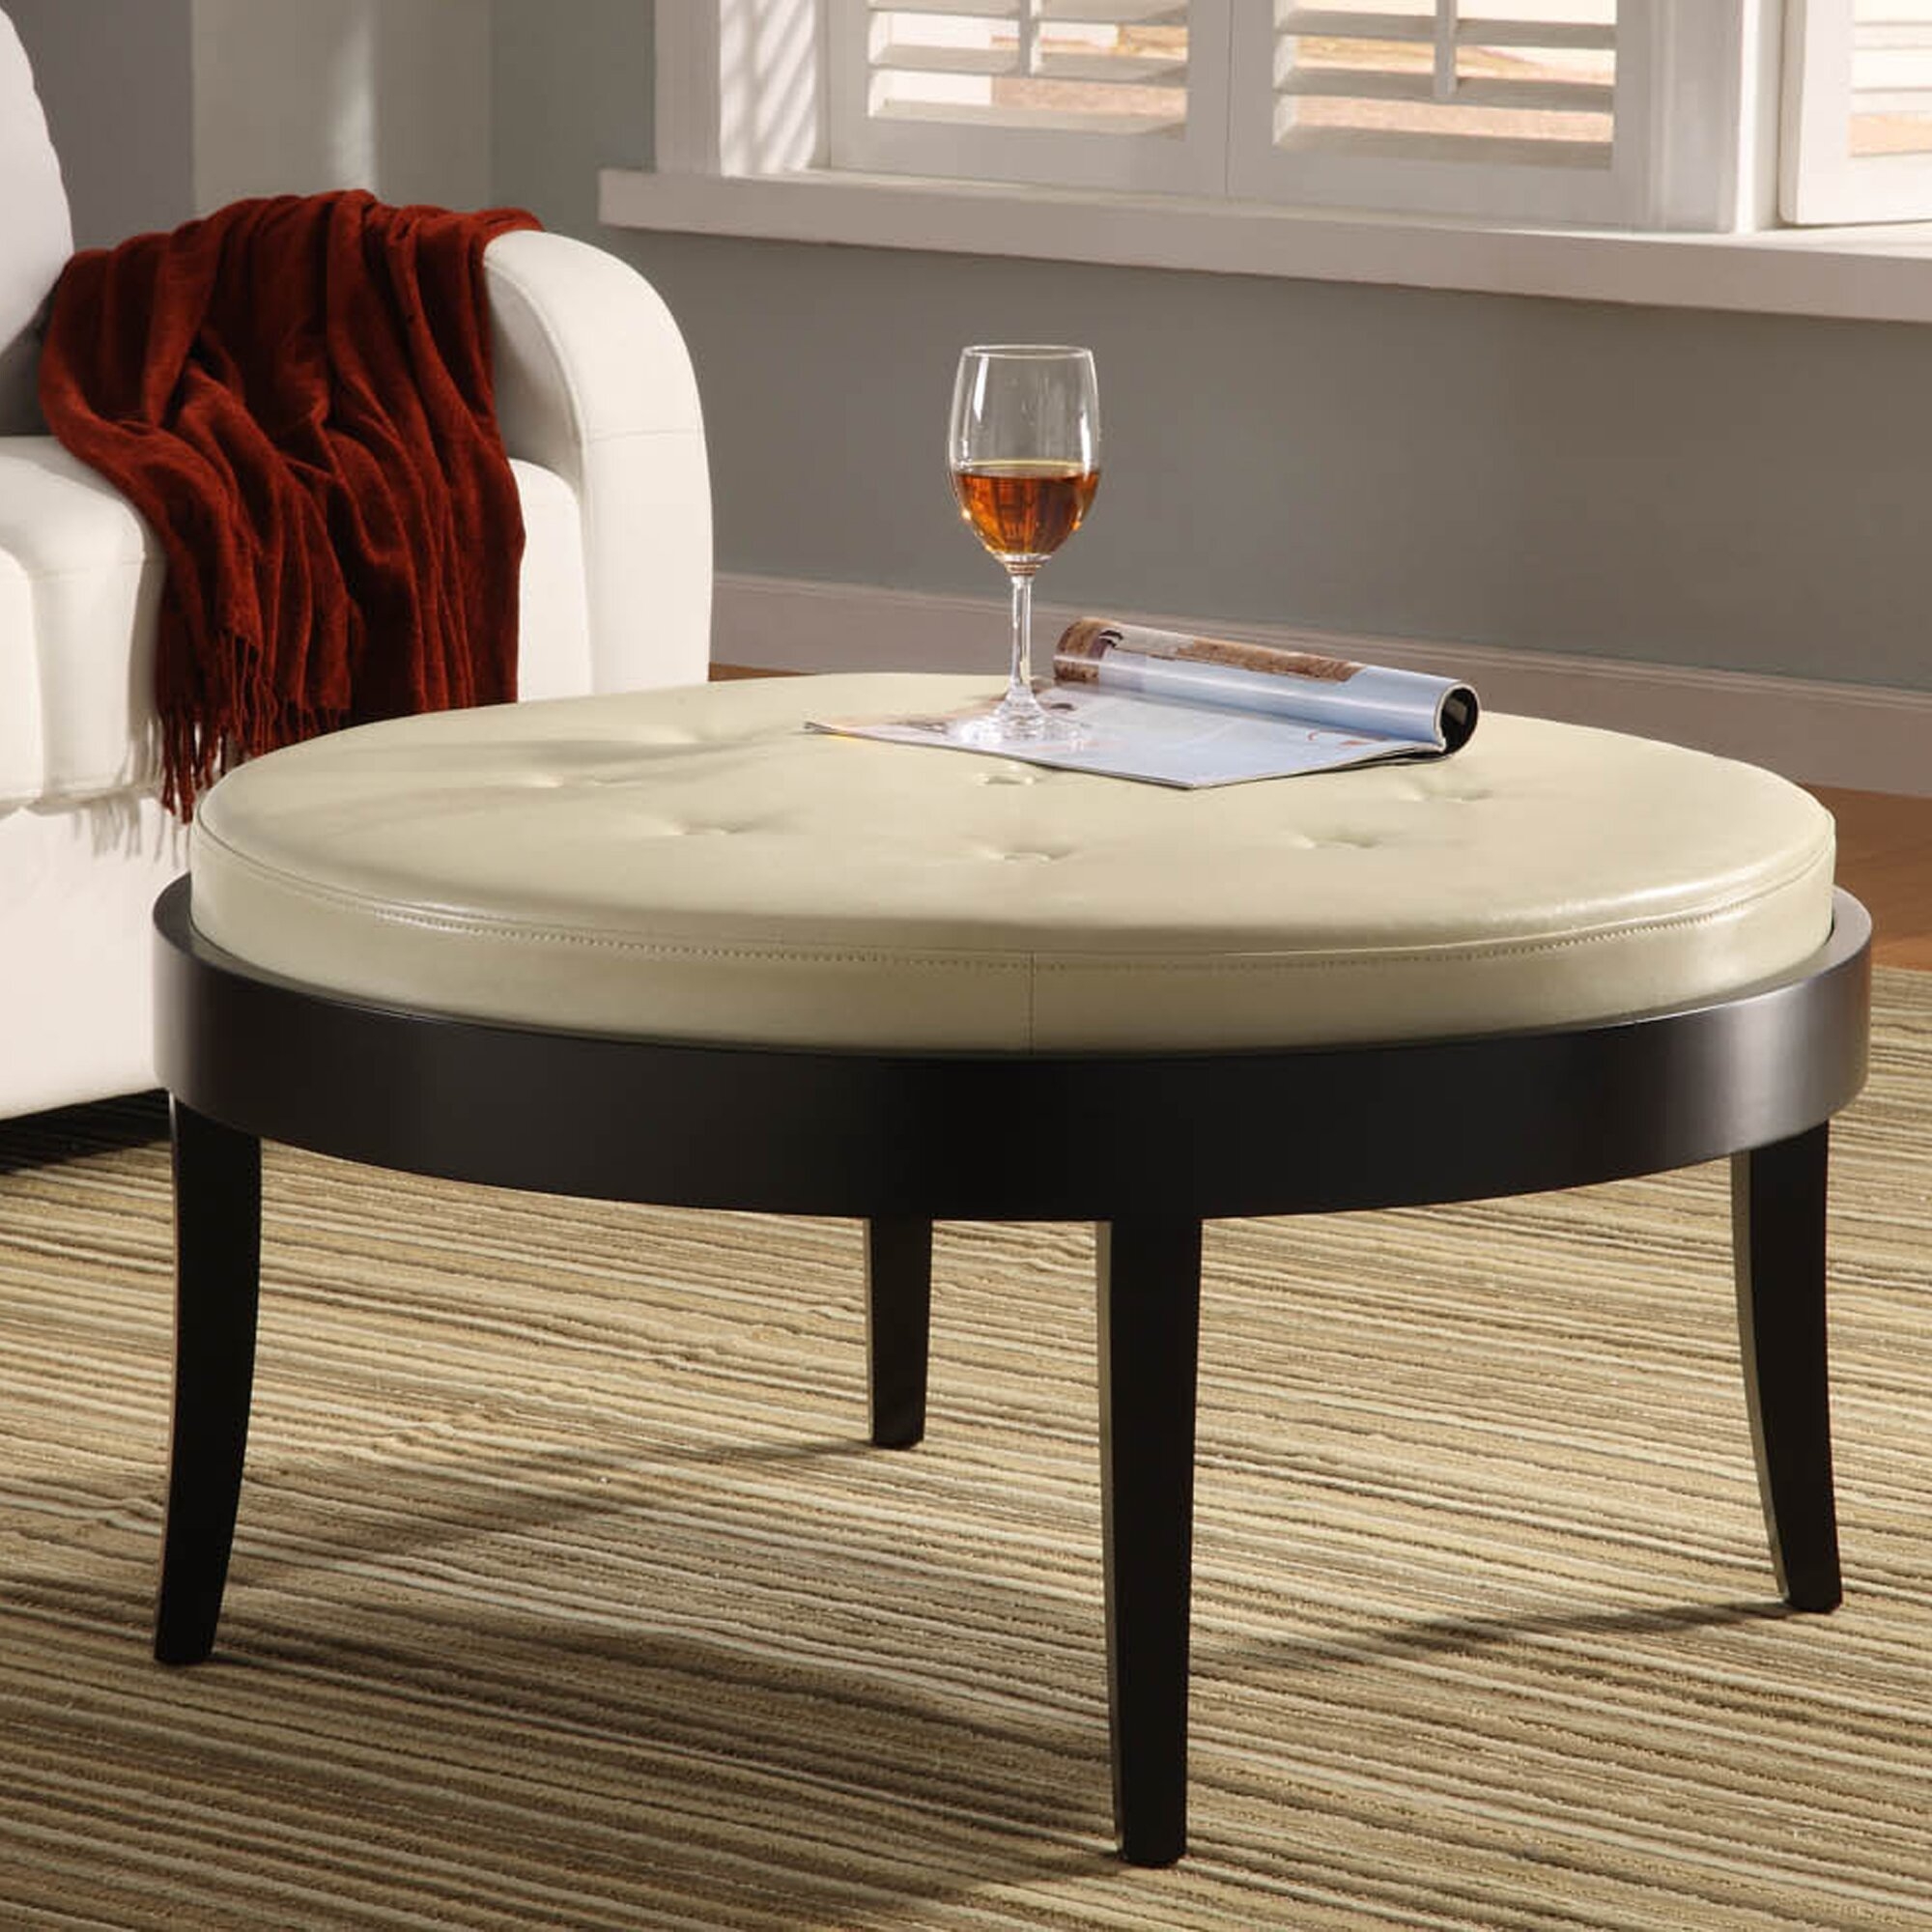 Citation coffee table ottoman with removable cushion